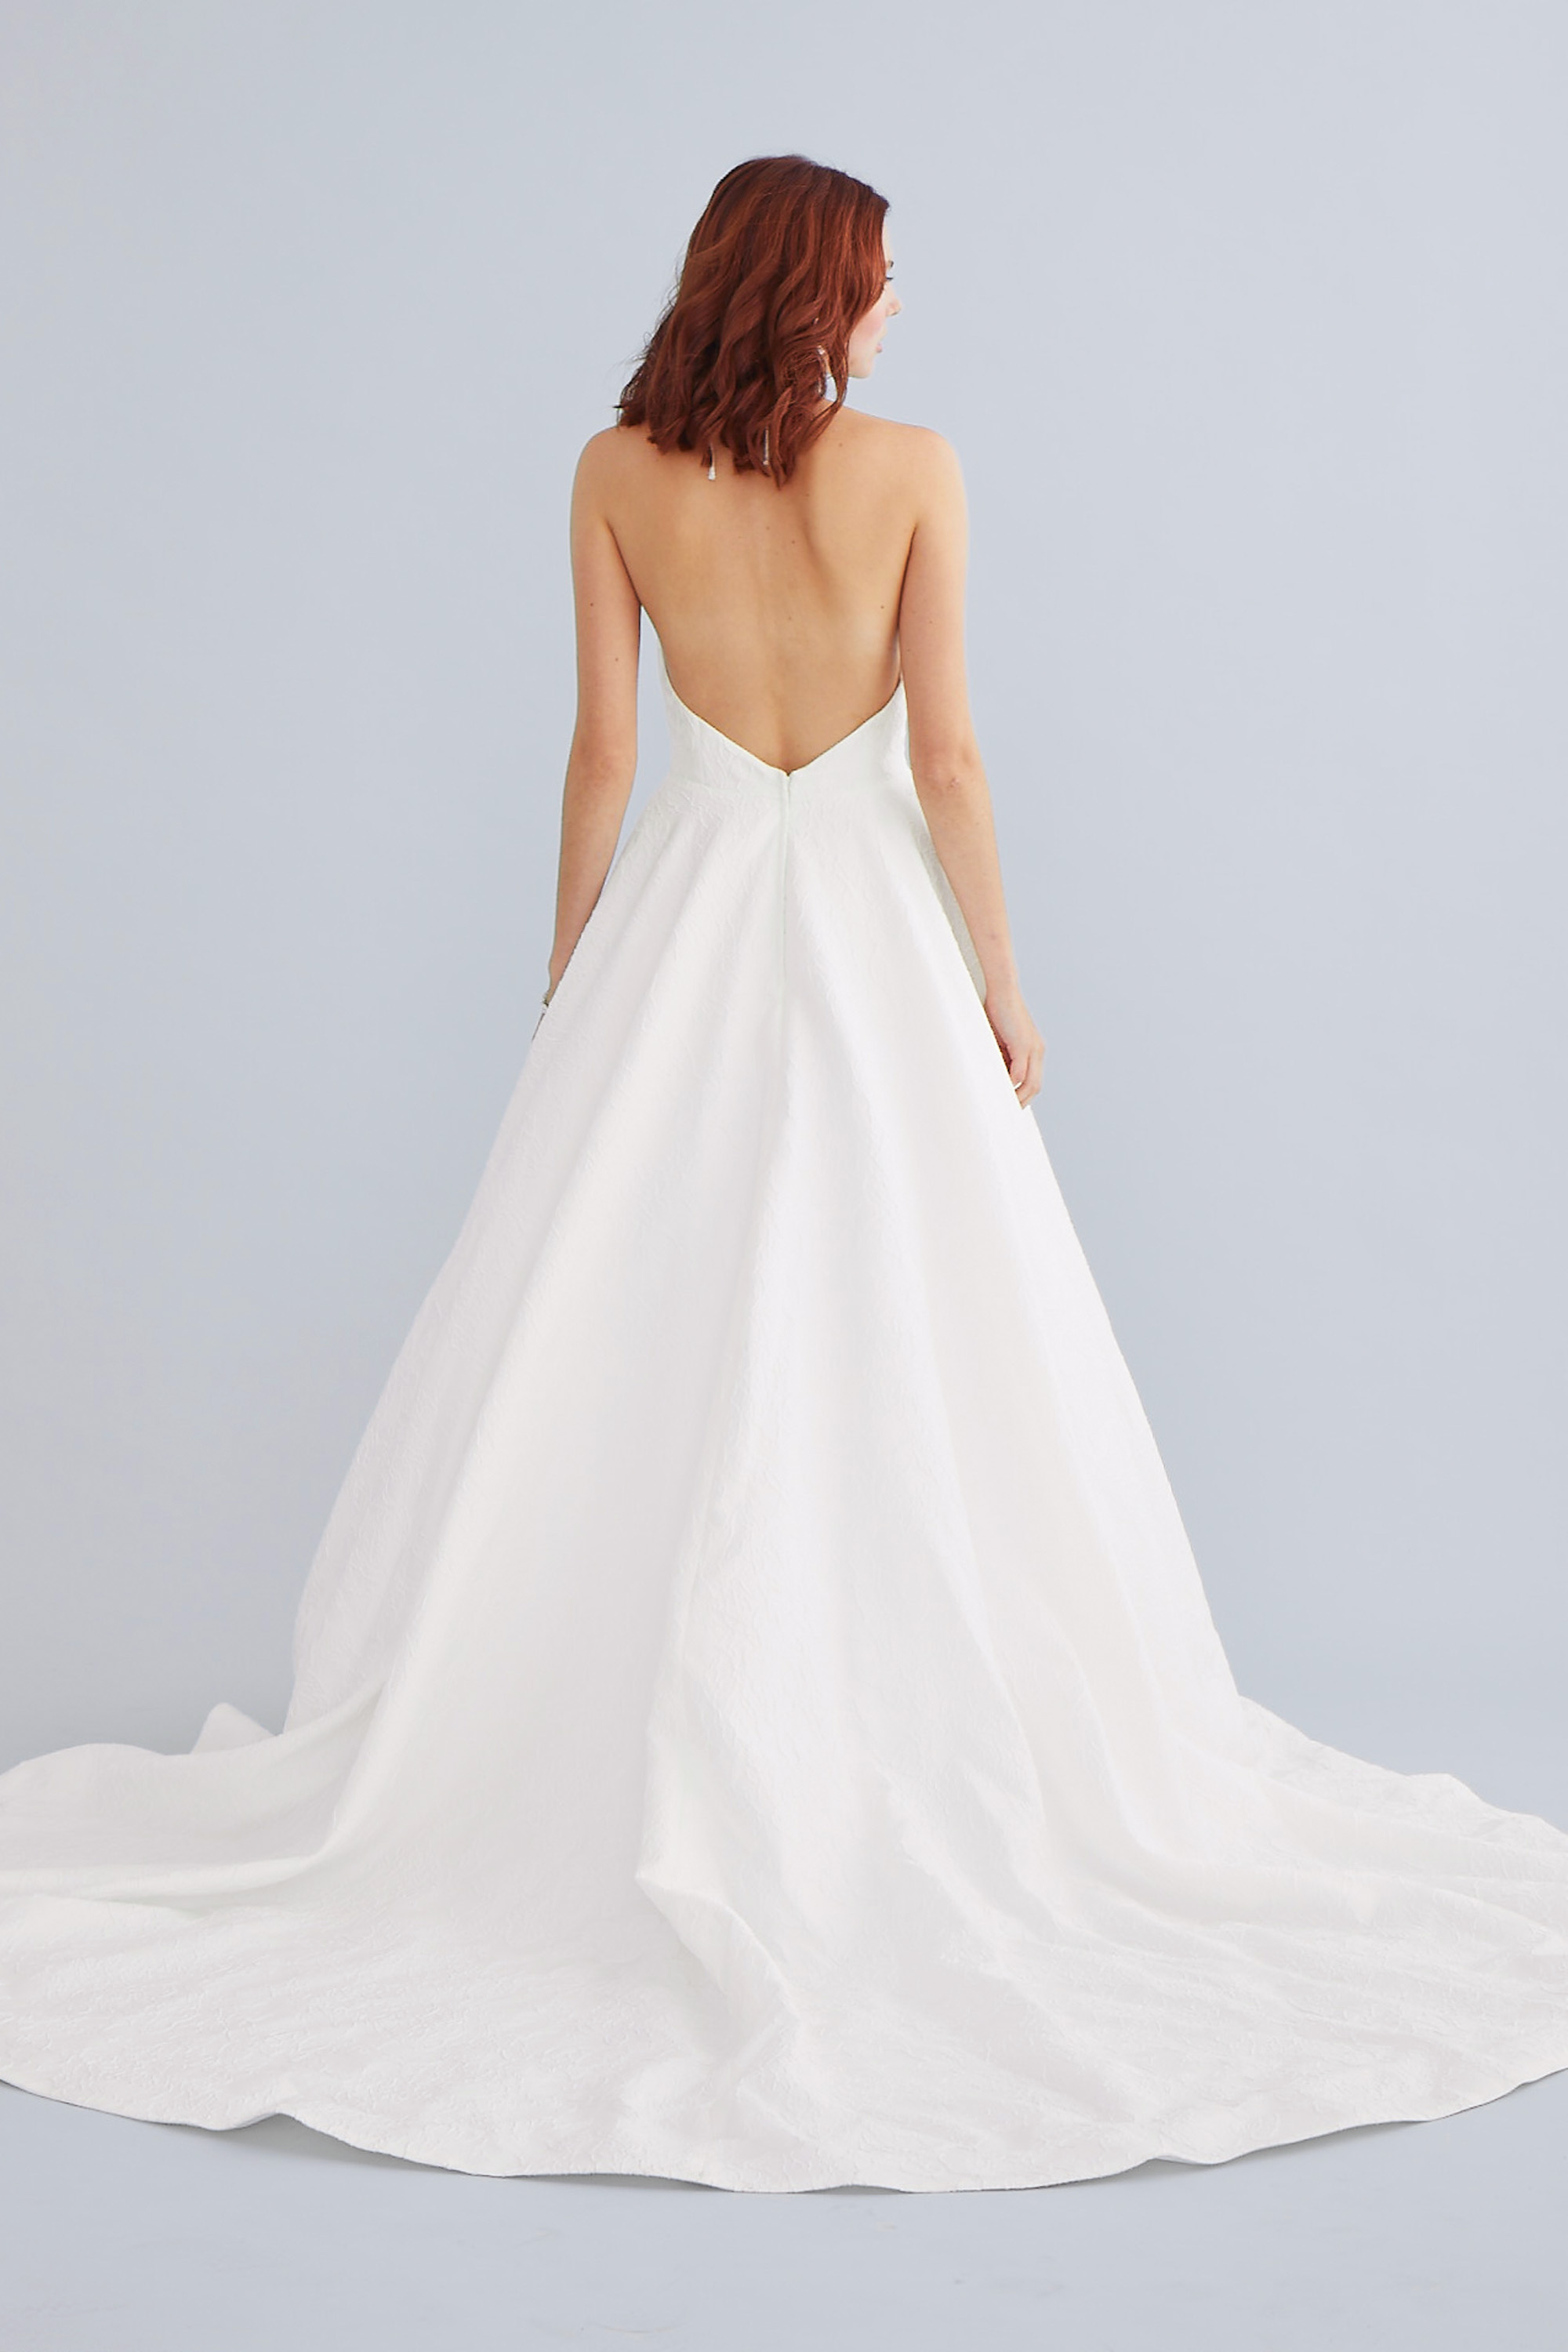 Cora gown